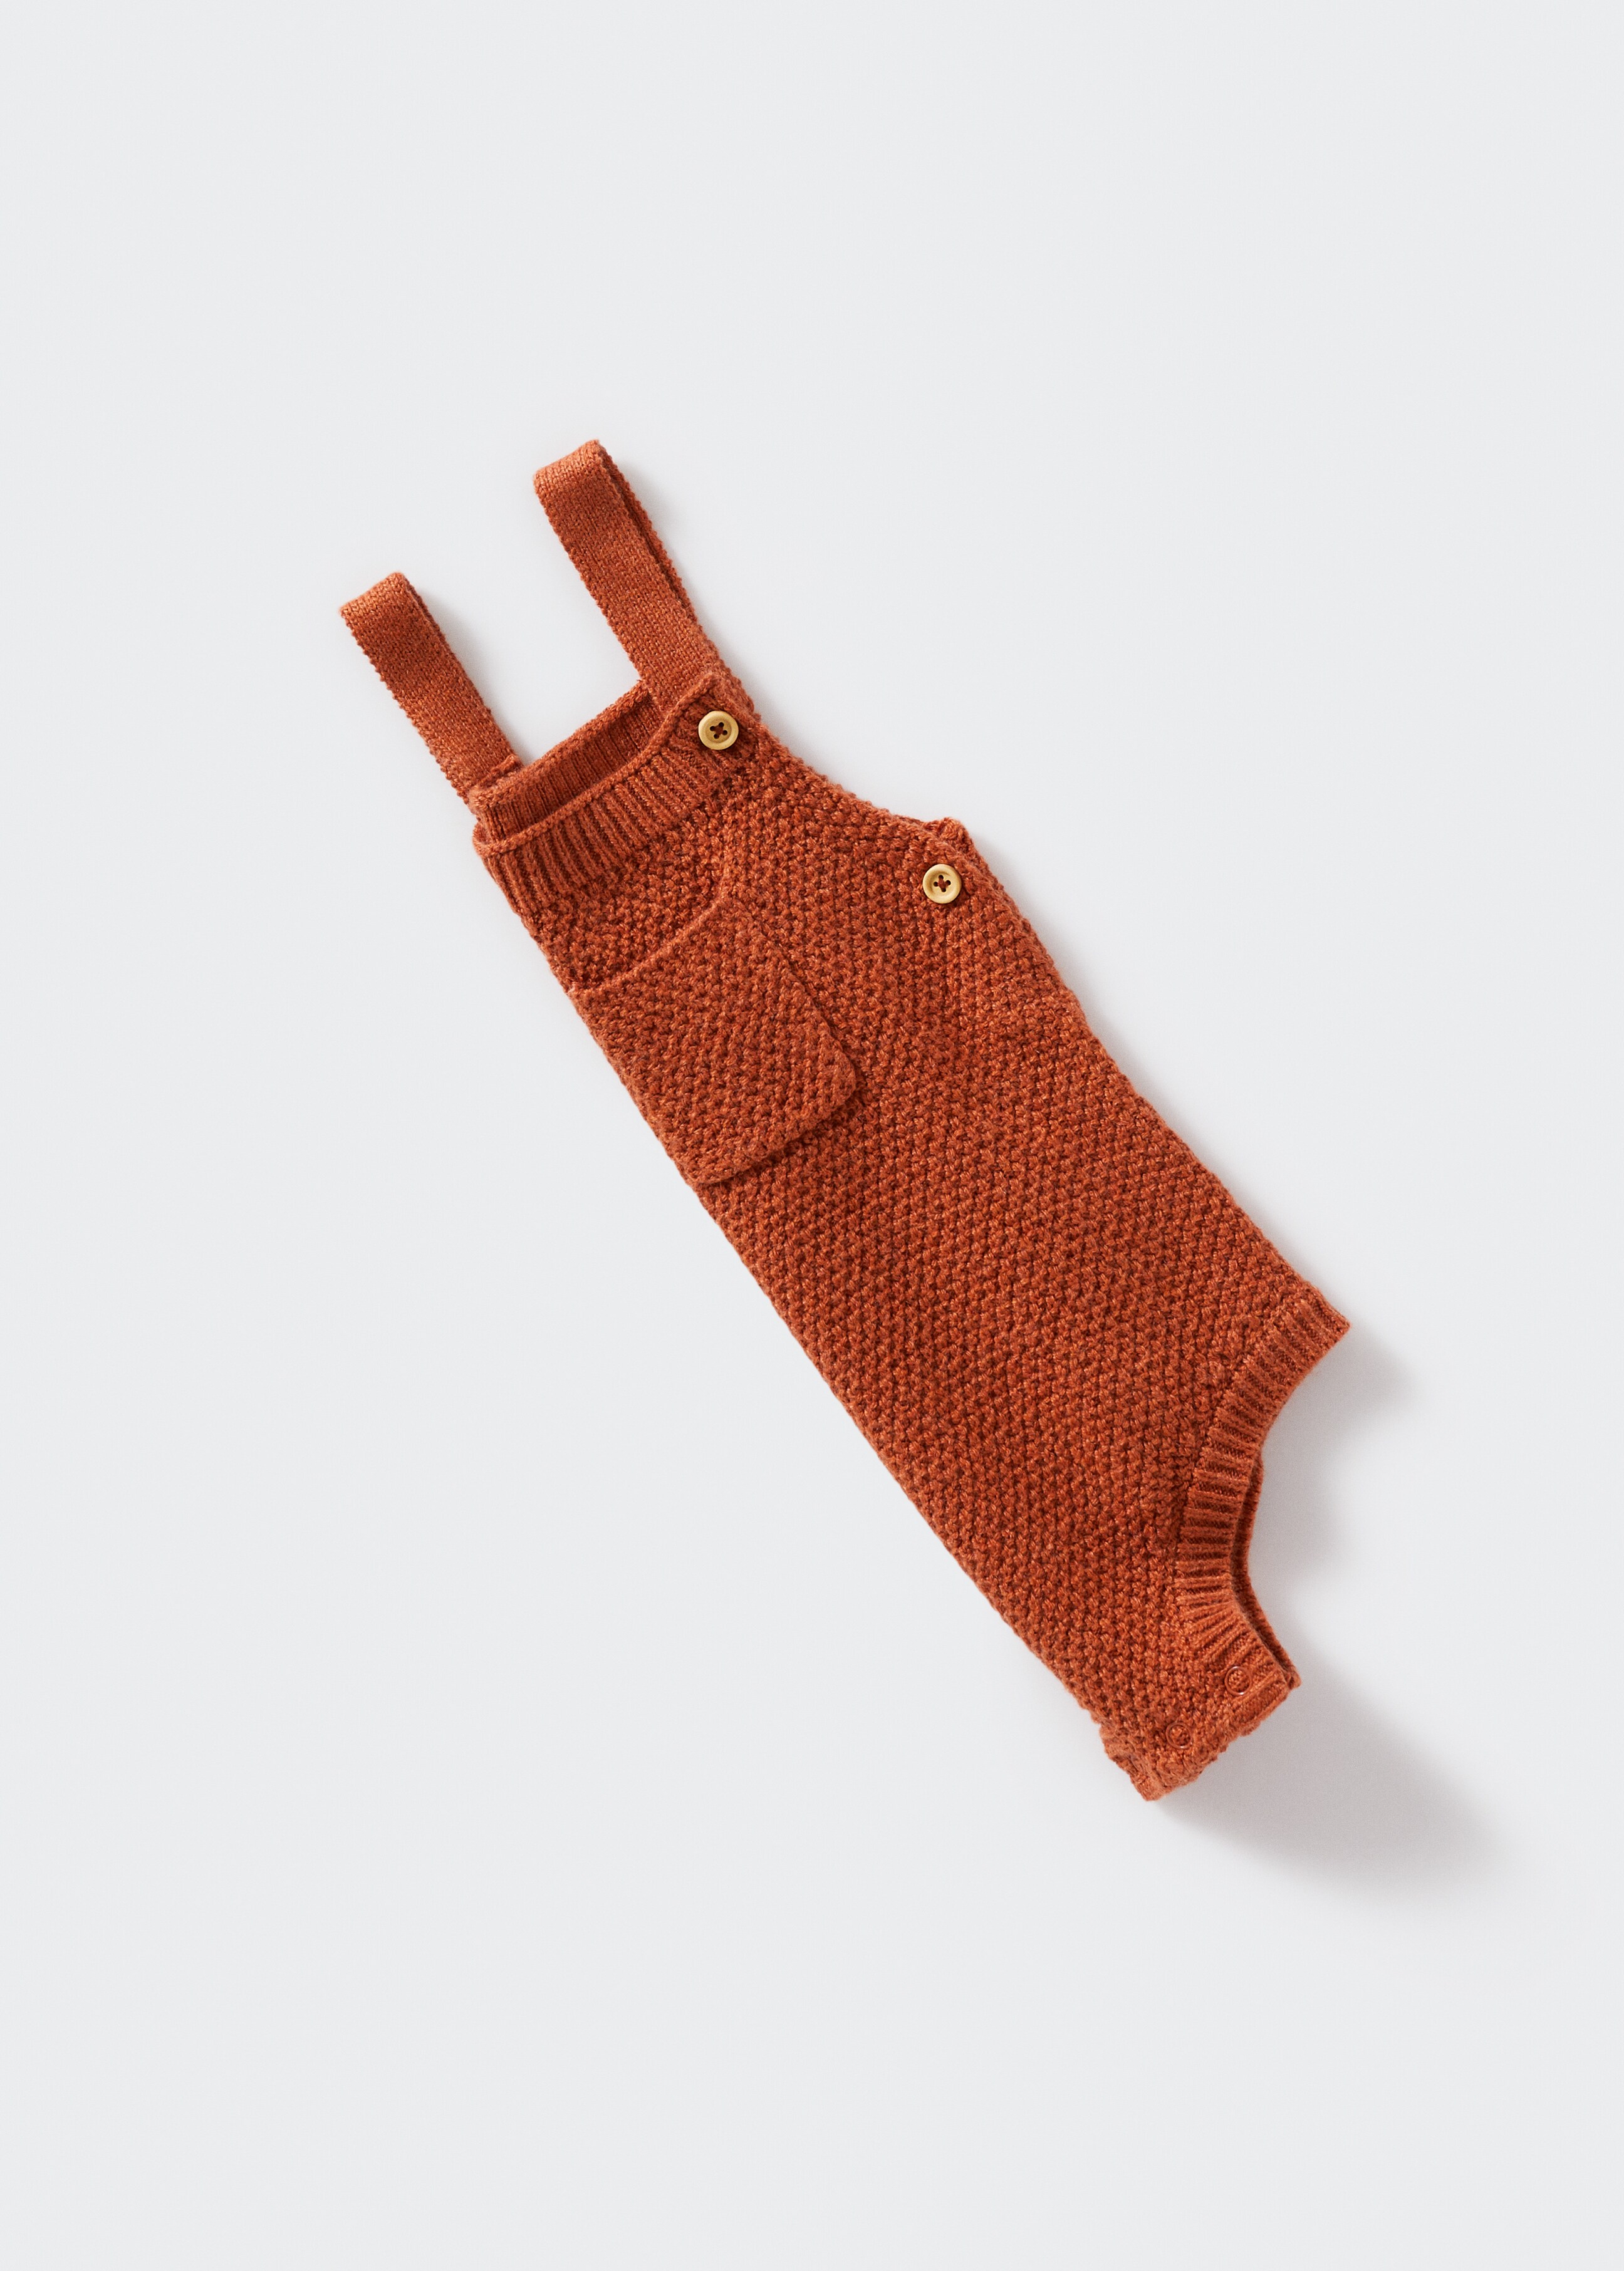 Cotton knit dungarees - Details of the article 8